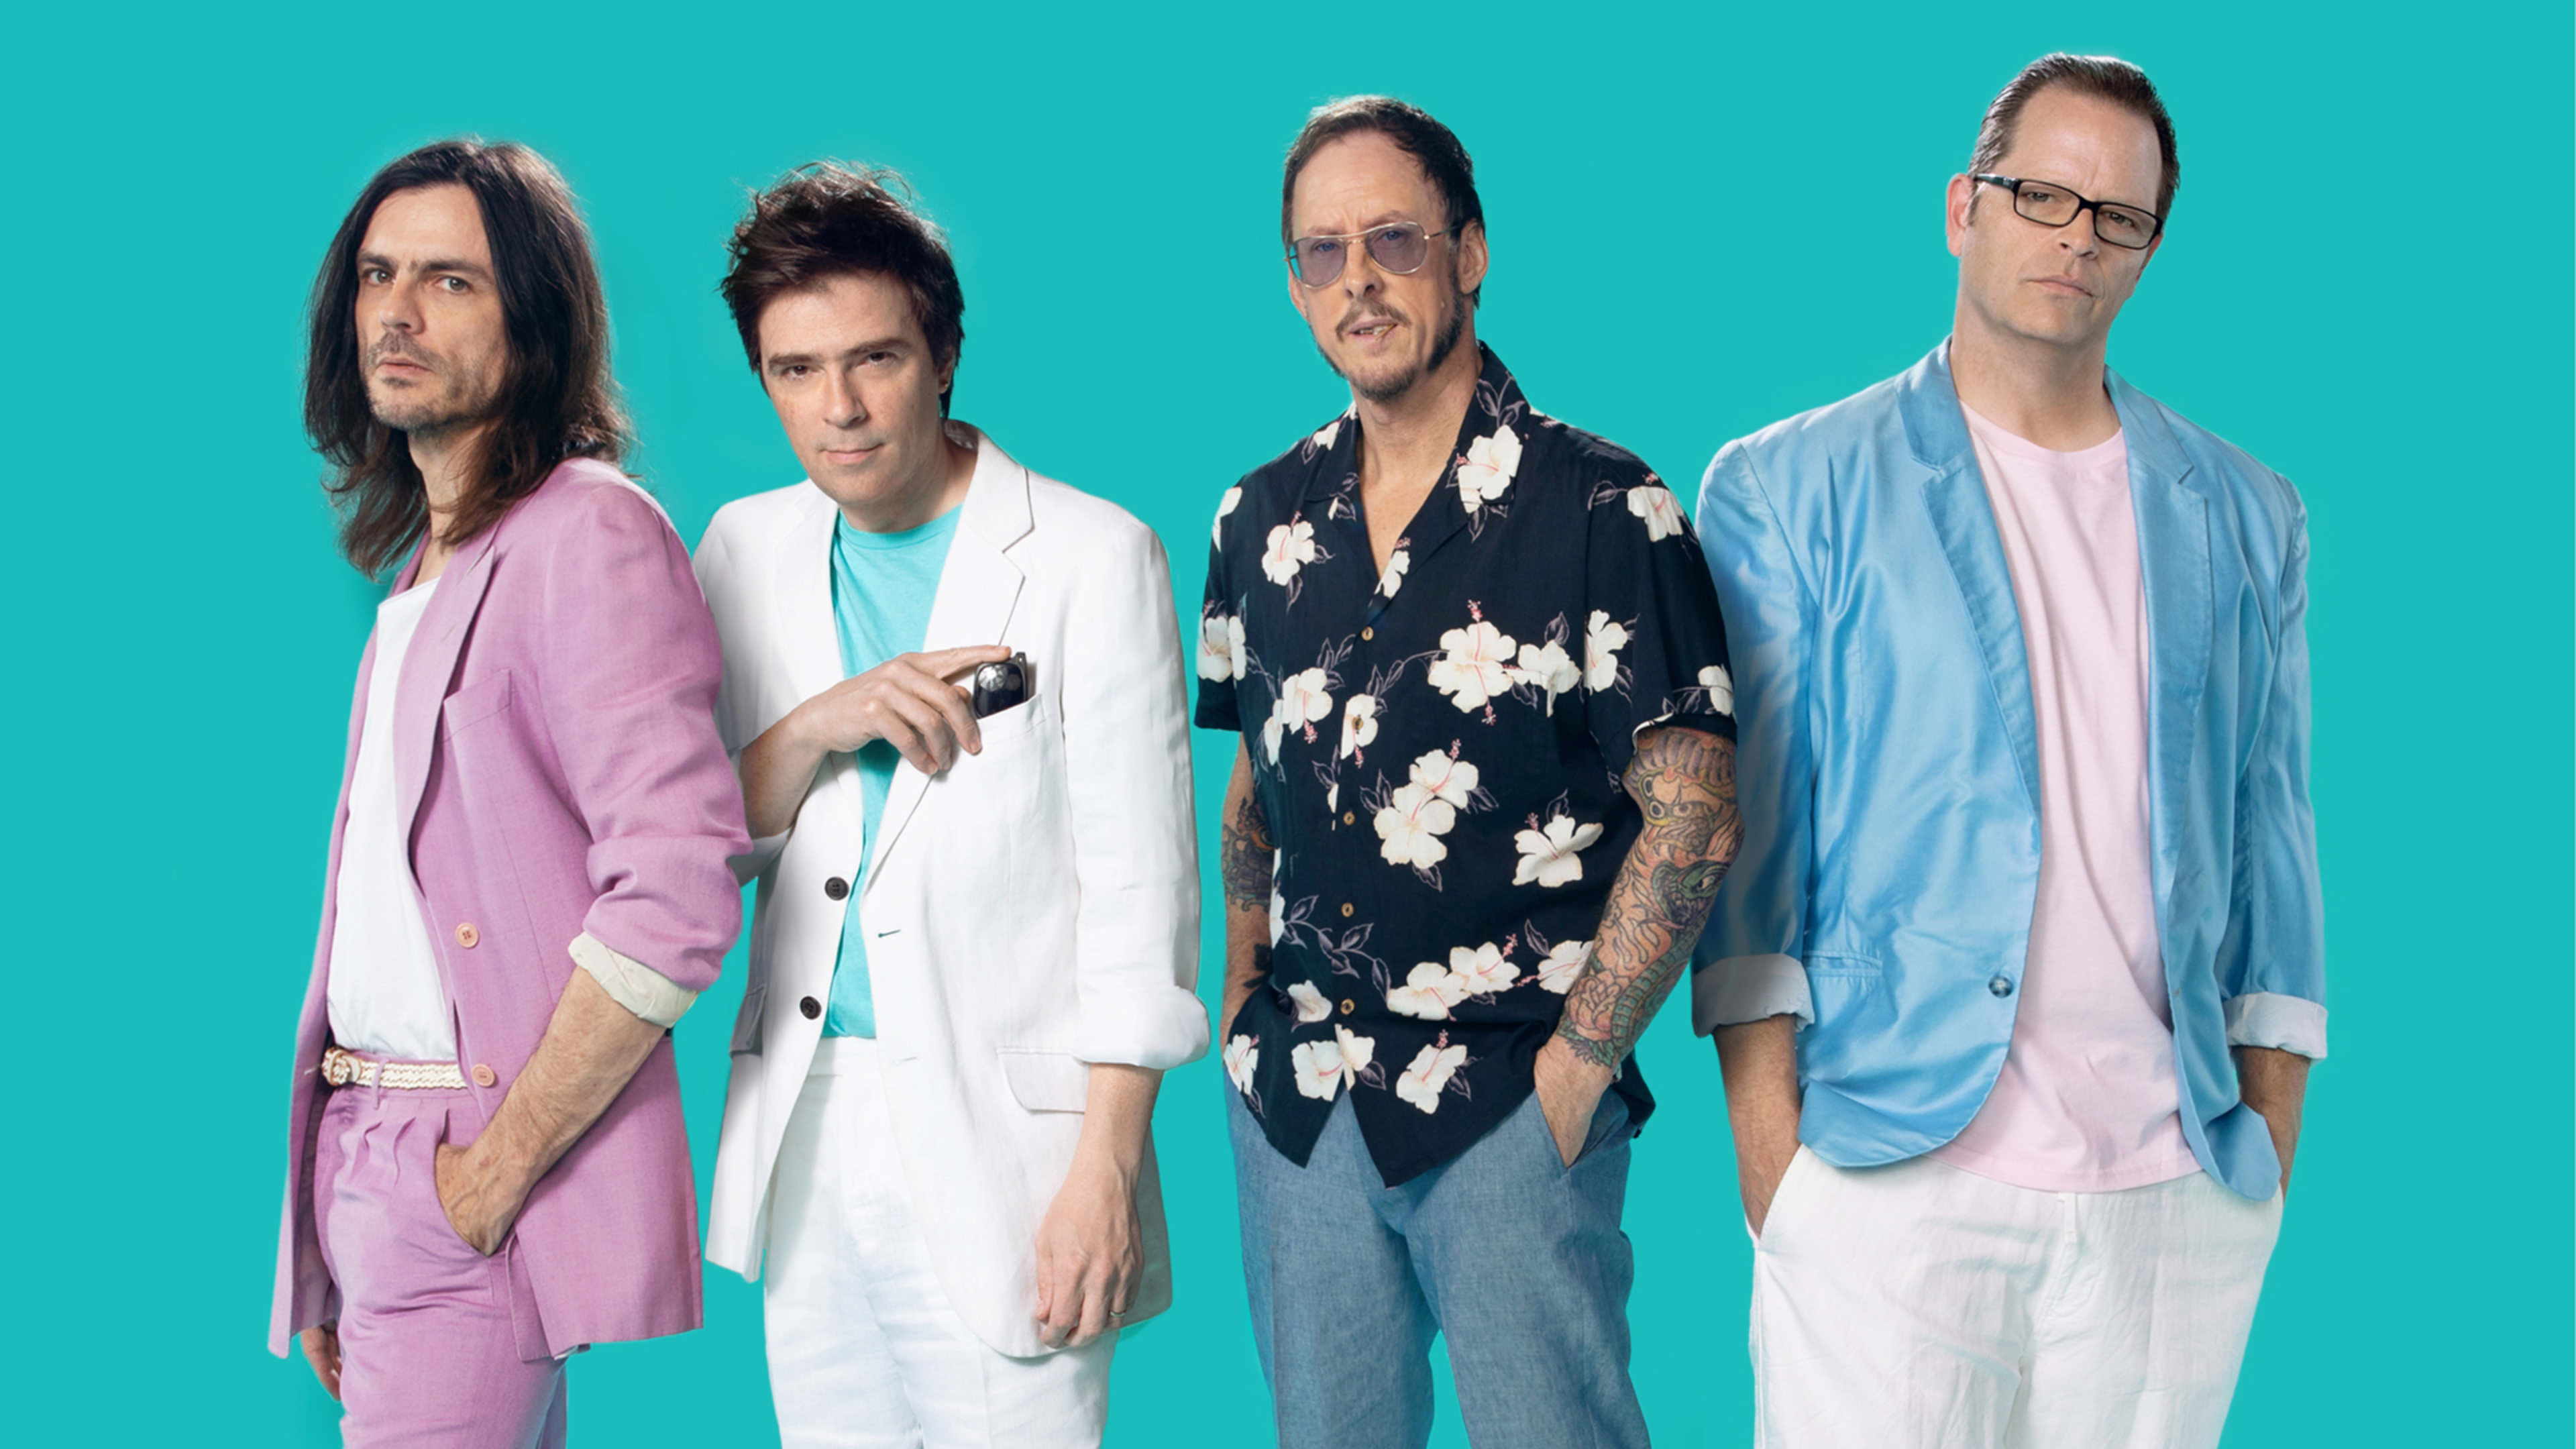 Need a lot more Weezer? Weezer’s got you covered